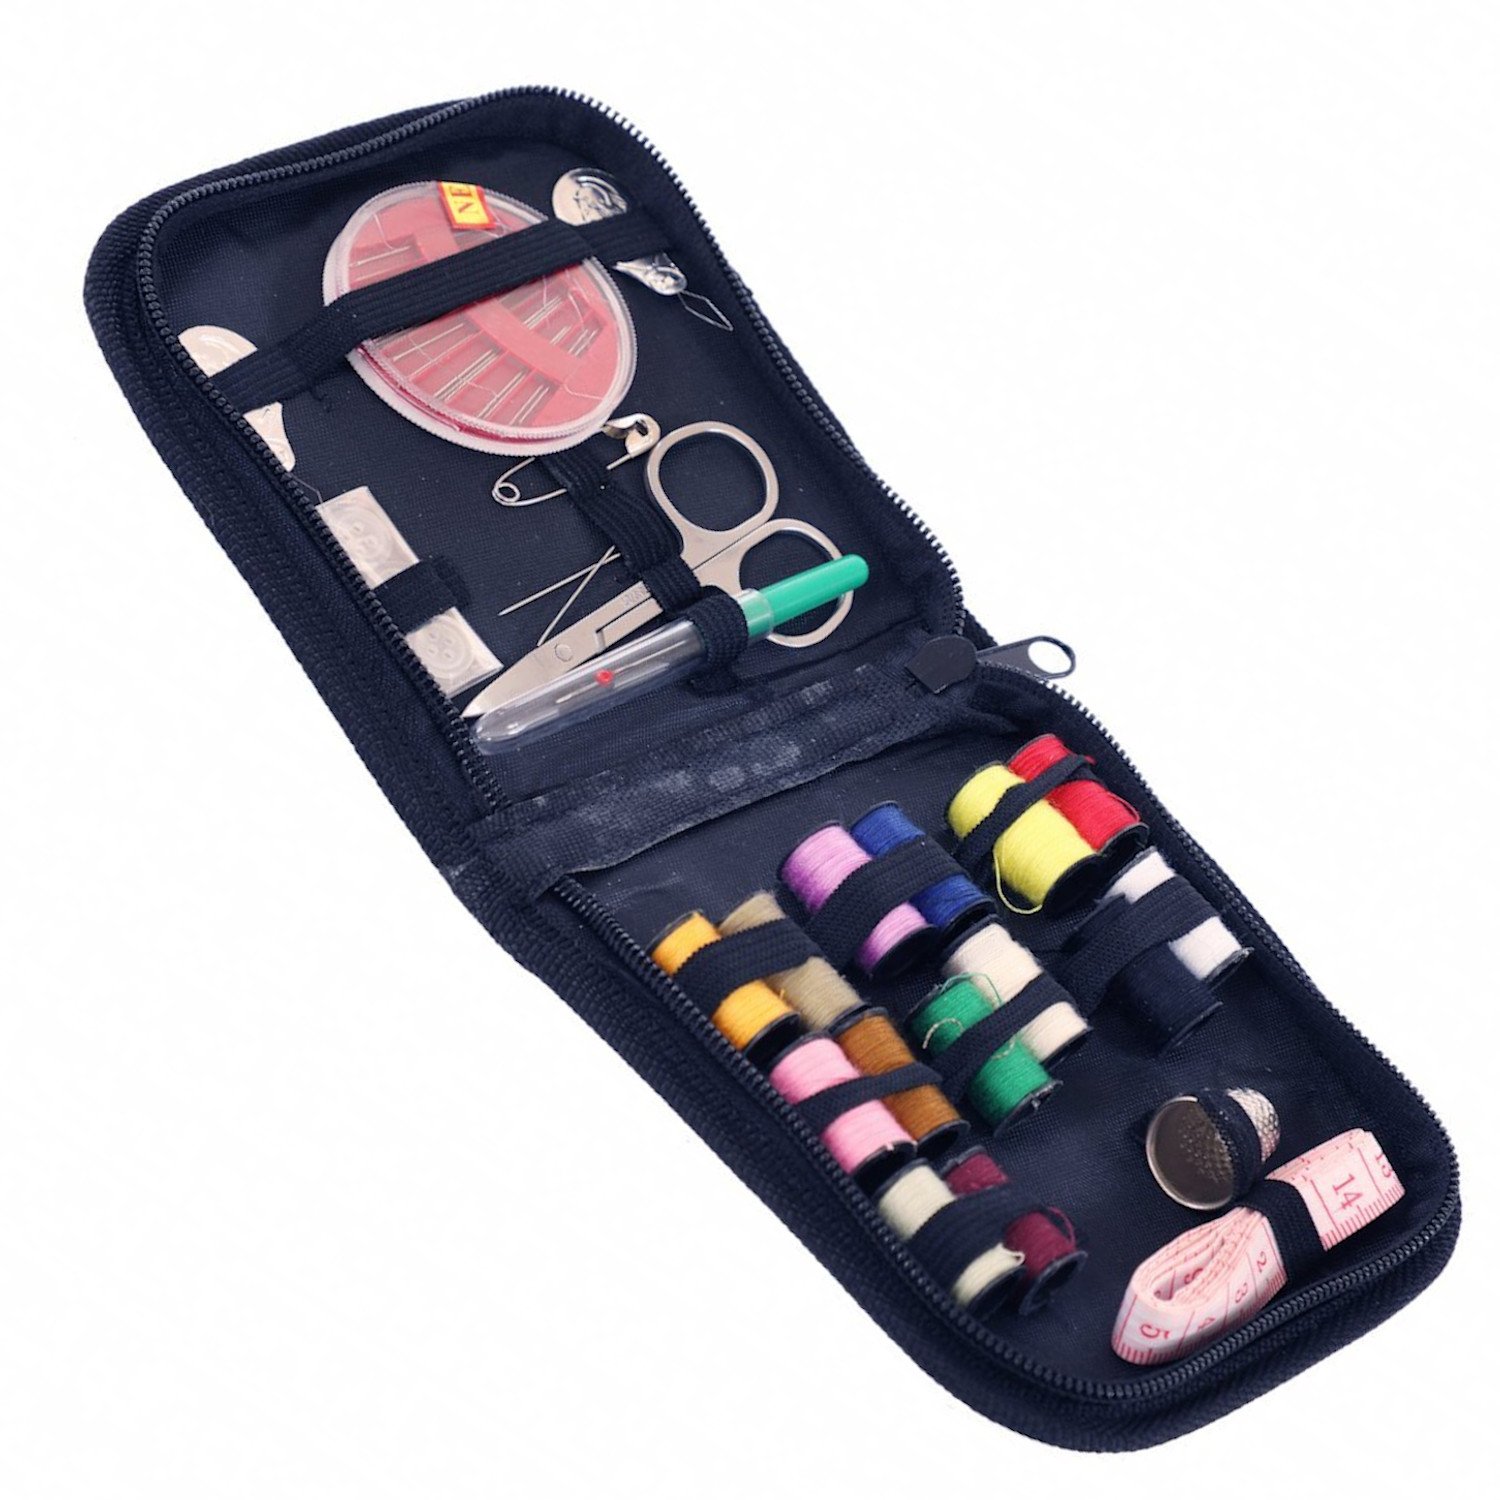 Travel Sewing Kit with Needle Thread Buttons Measuring Tape Scissors